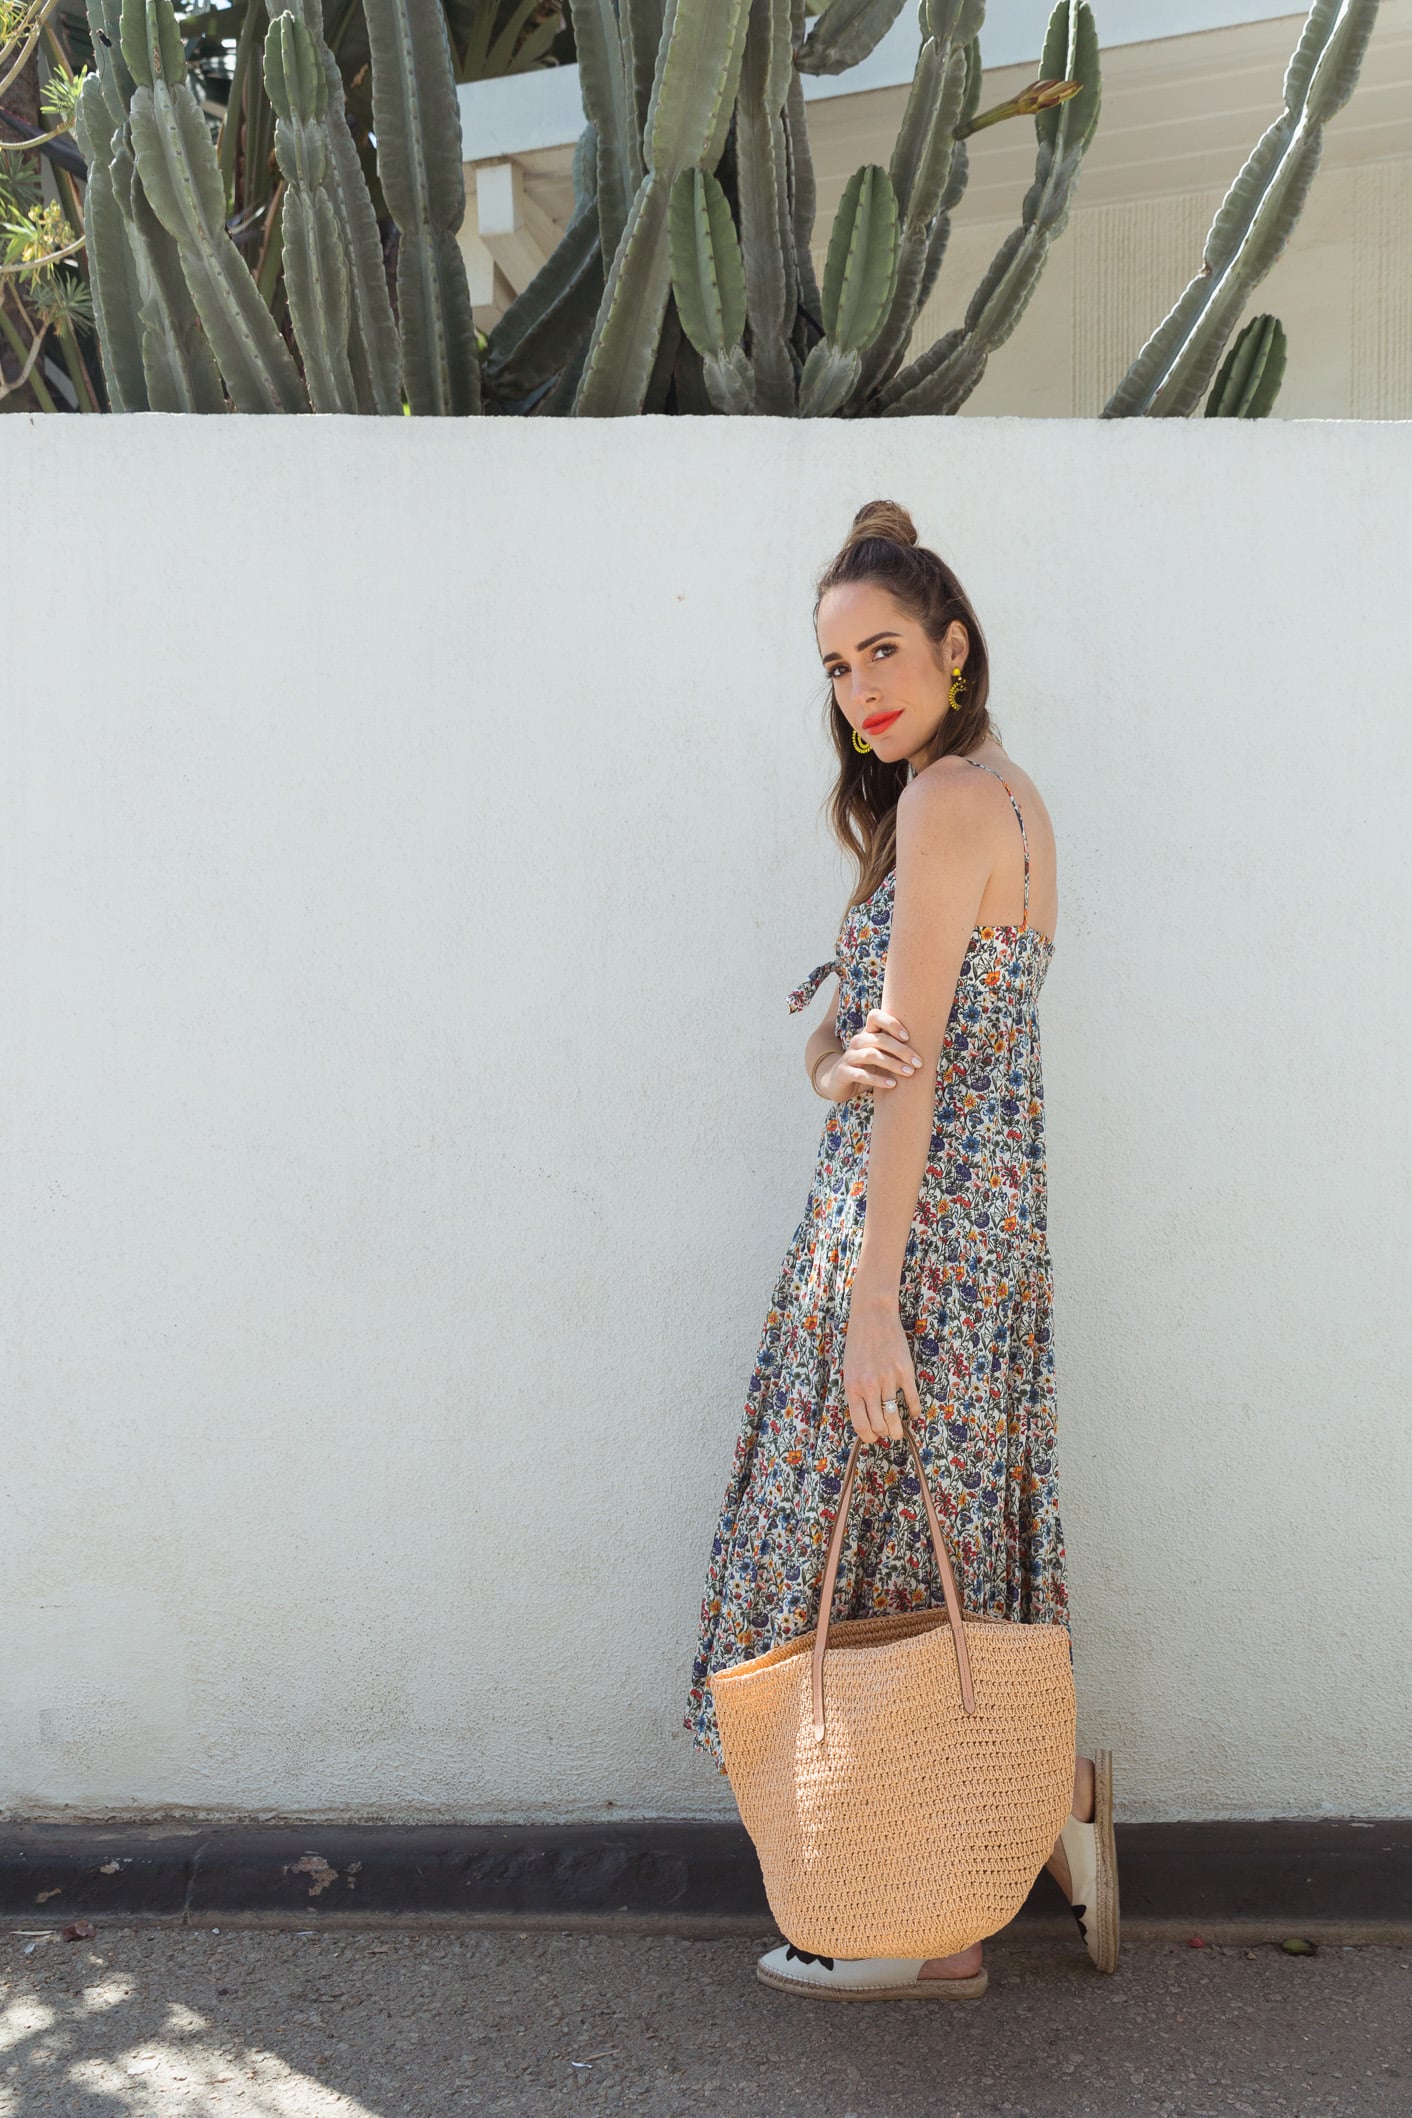 Louise Roe wearing a summer floral dress from J Crew